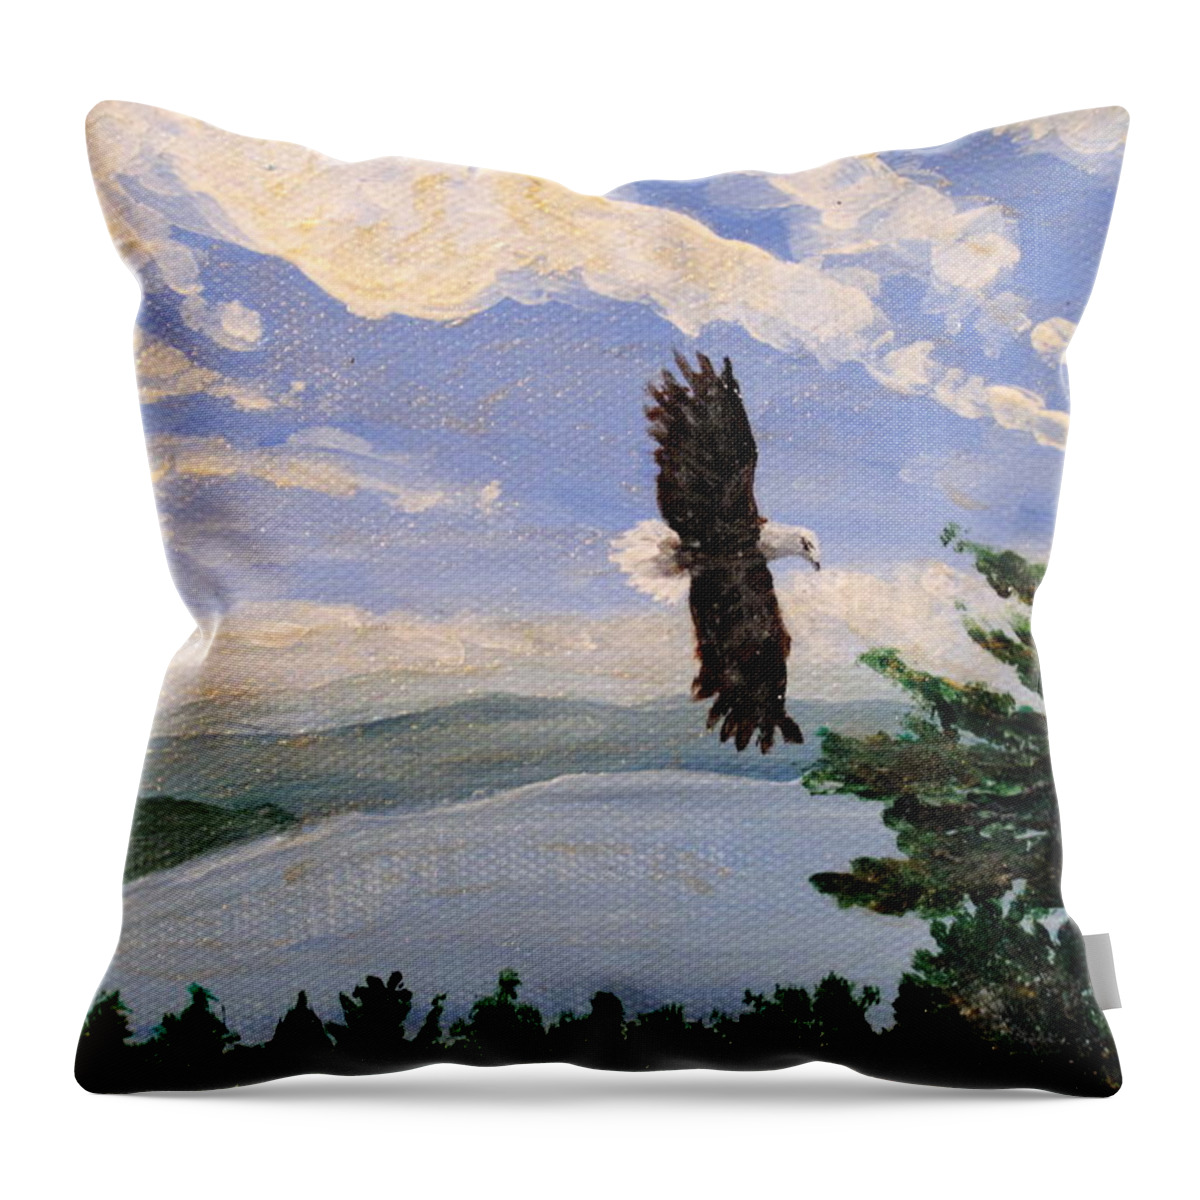 Bald Headed Eagle Throw Pillow featuring the painting Eagles Fly Over Lake Huron by Ian MacDonald